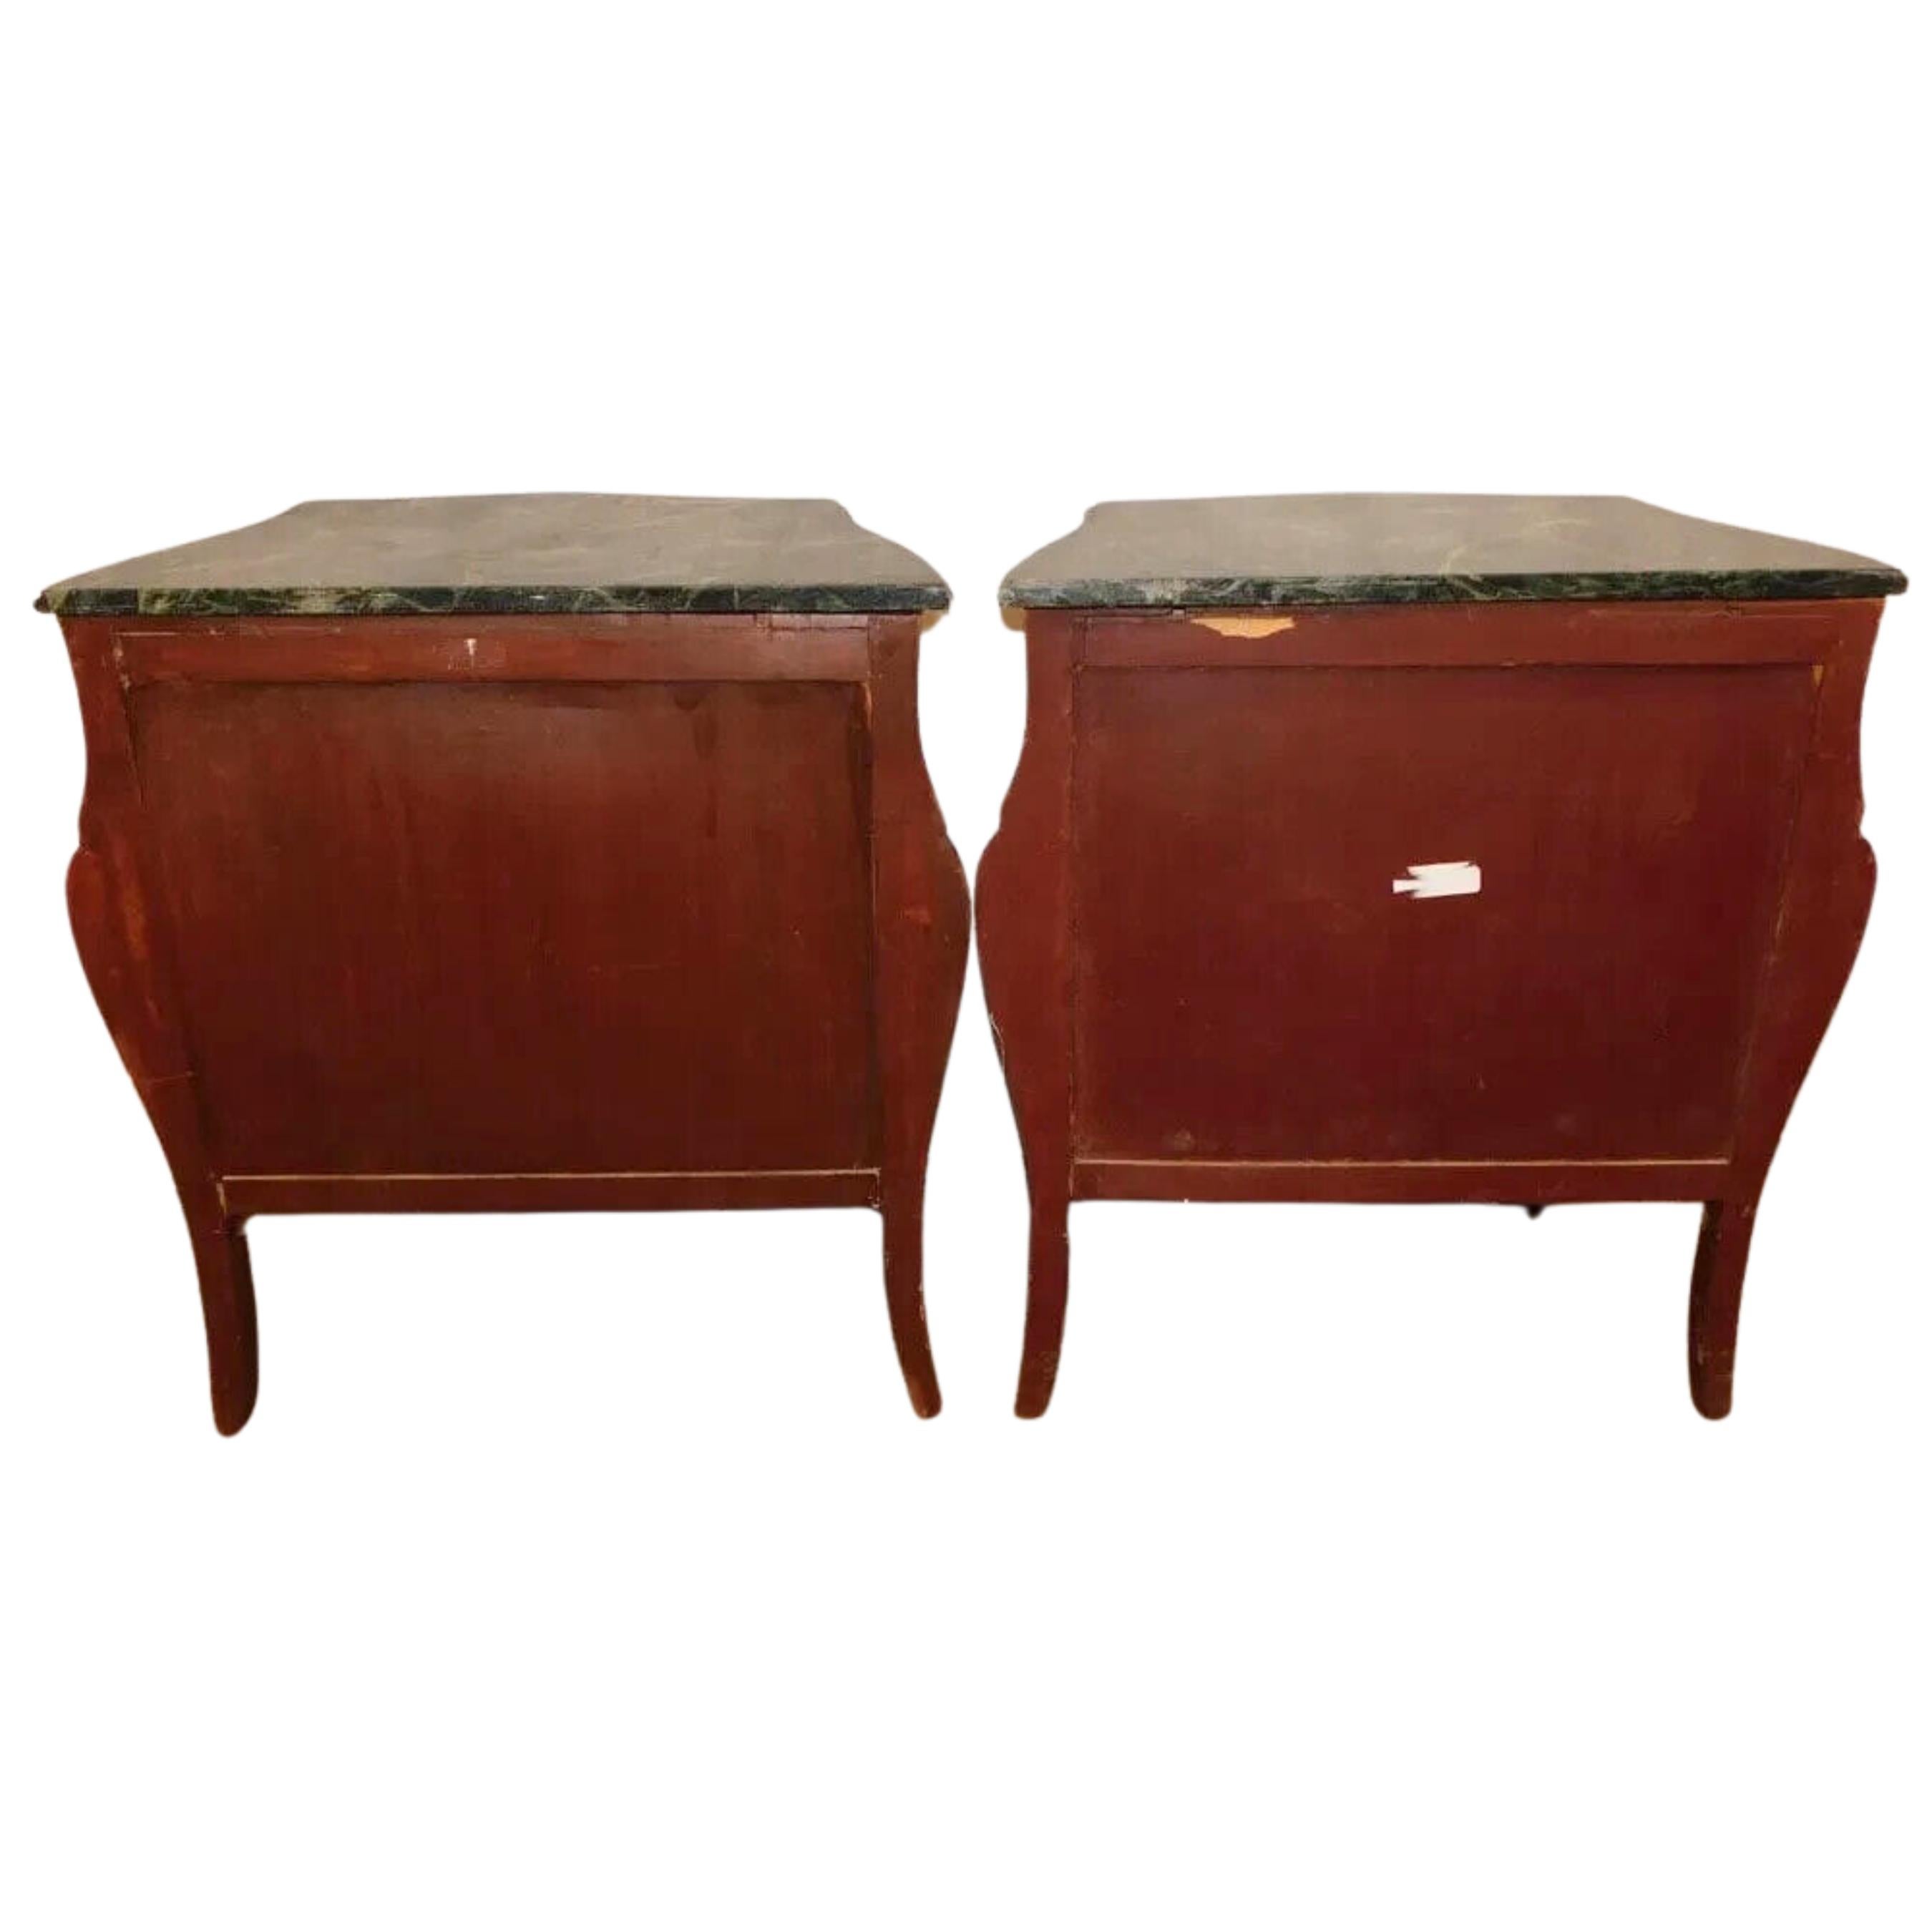 20th C. Walnut Inlay, Marble Top, Diminutive, With Bronze Commodes, Set of Two! 7